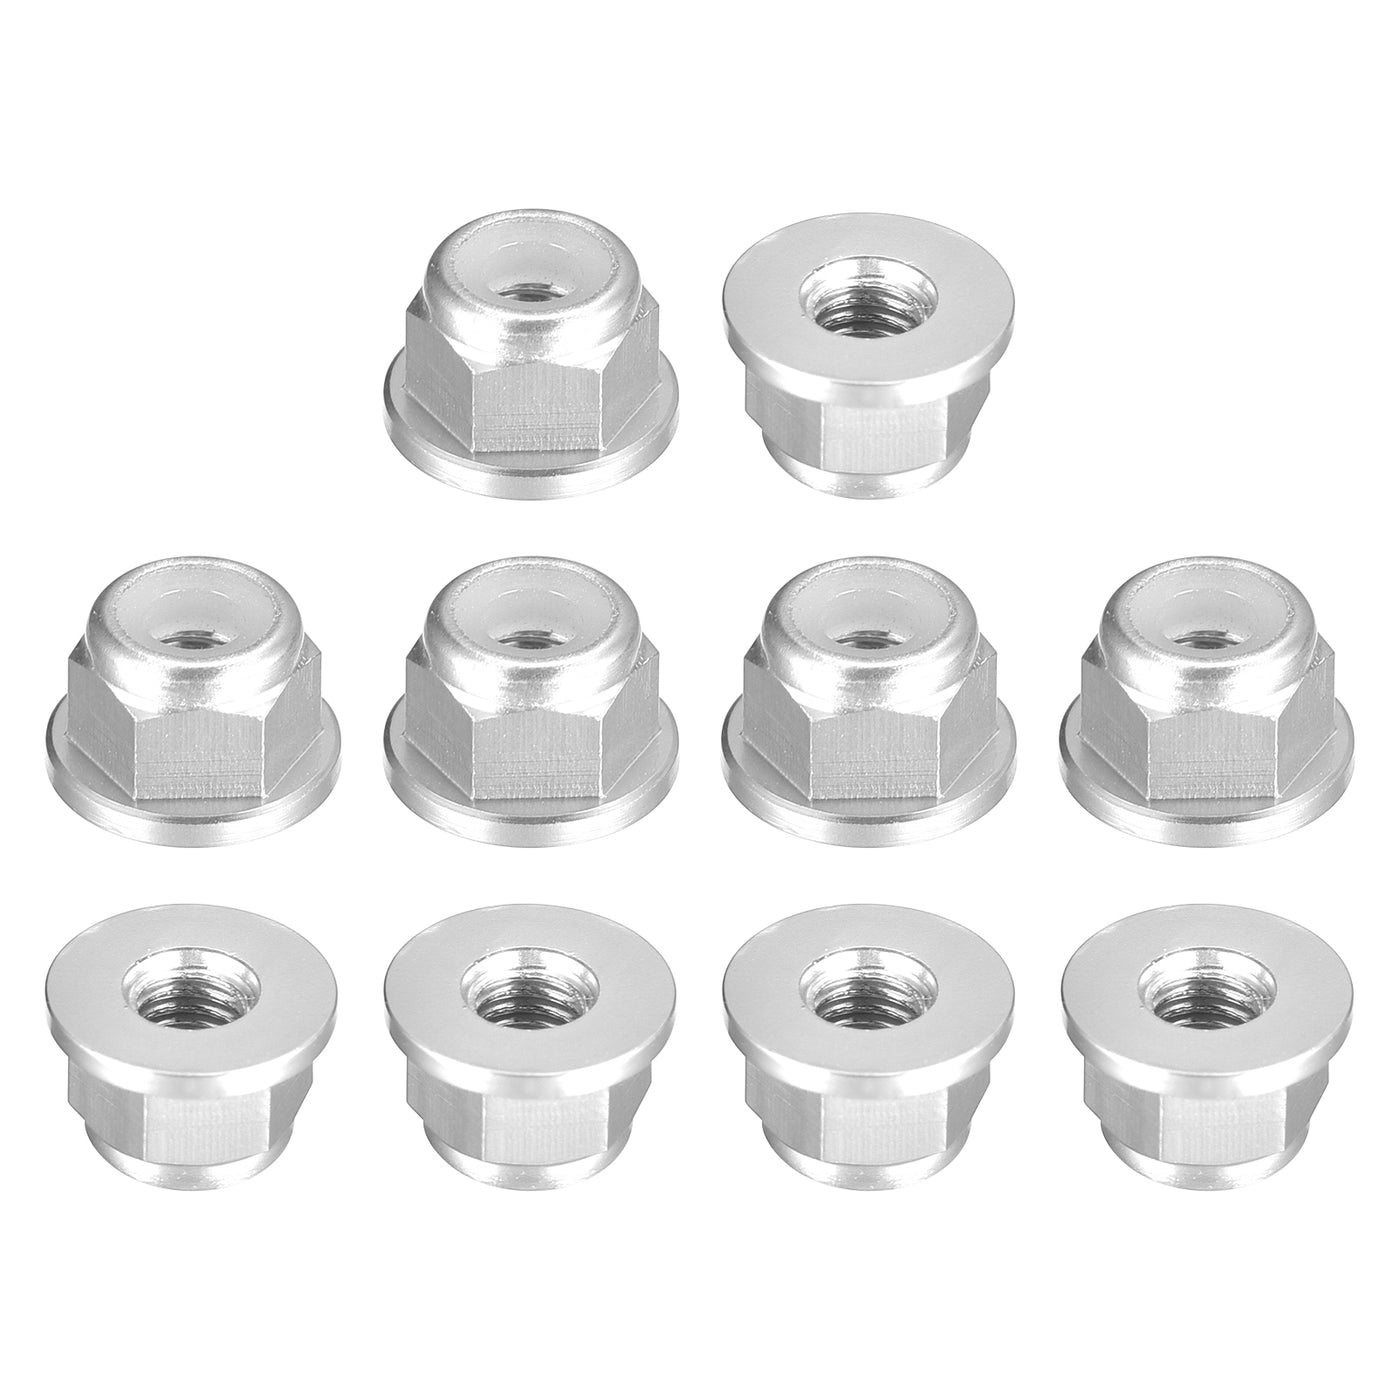 uxcell Uxcell Nylon Insert Hex Lock Nuts, 10pcs - M3 x 0.5mm Aluminum Alloy Self-Locking Nut, Anodizing Flange Lock Nut for Fasteners (Silver)